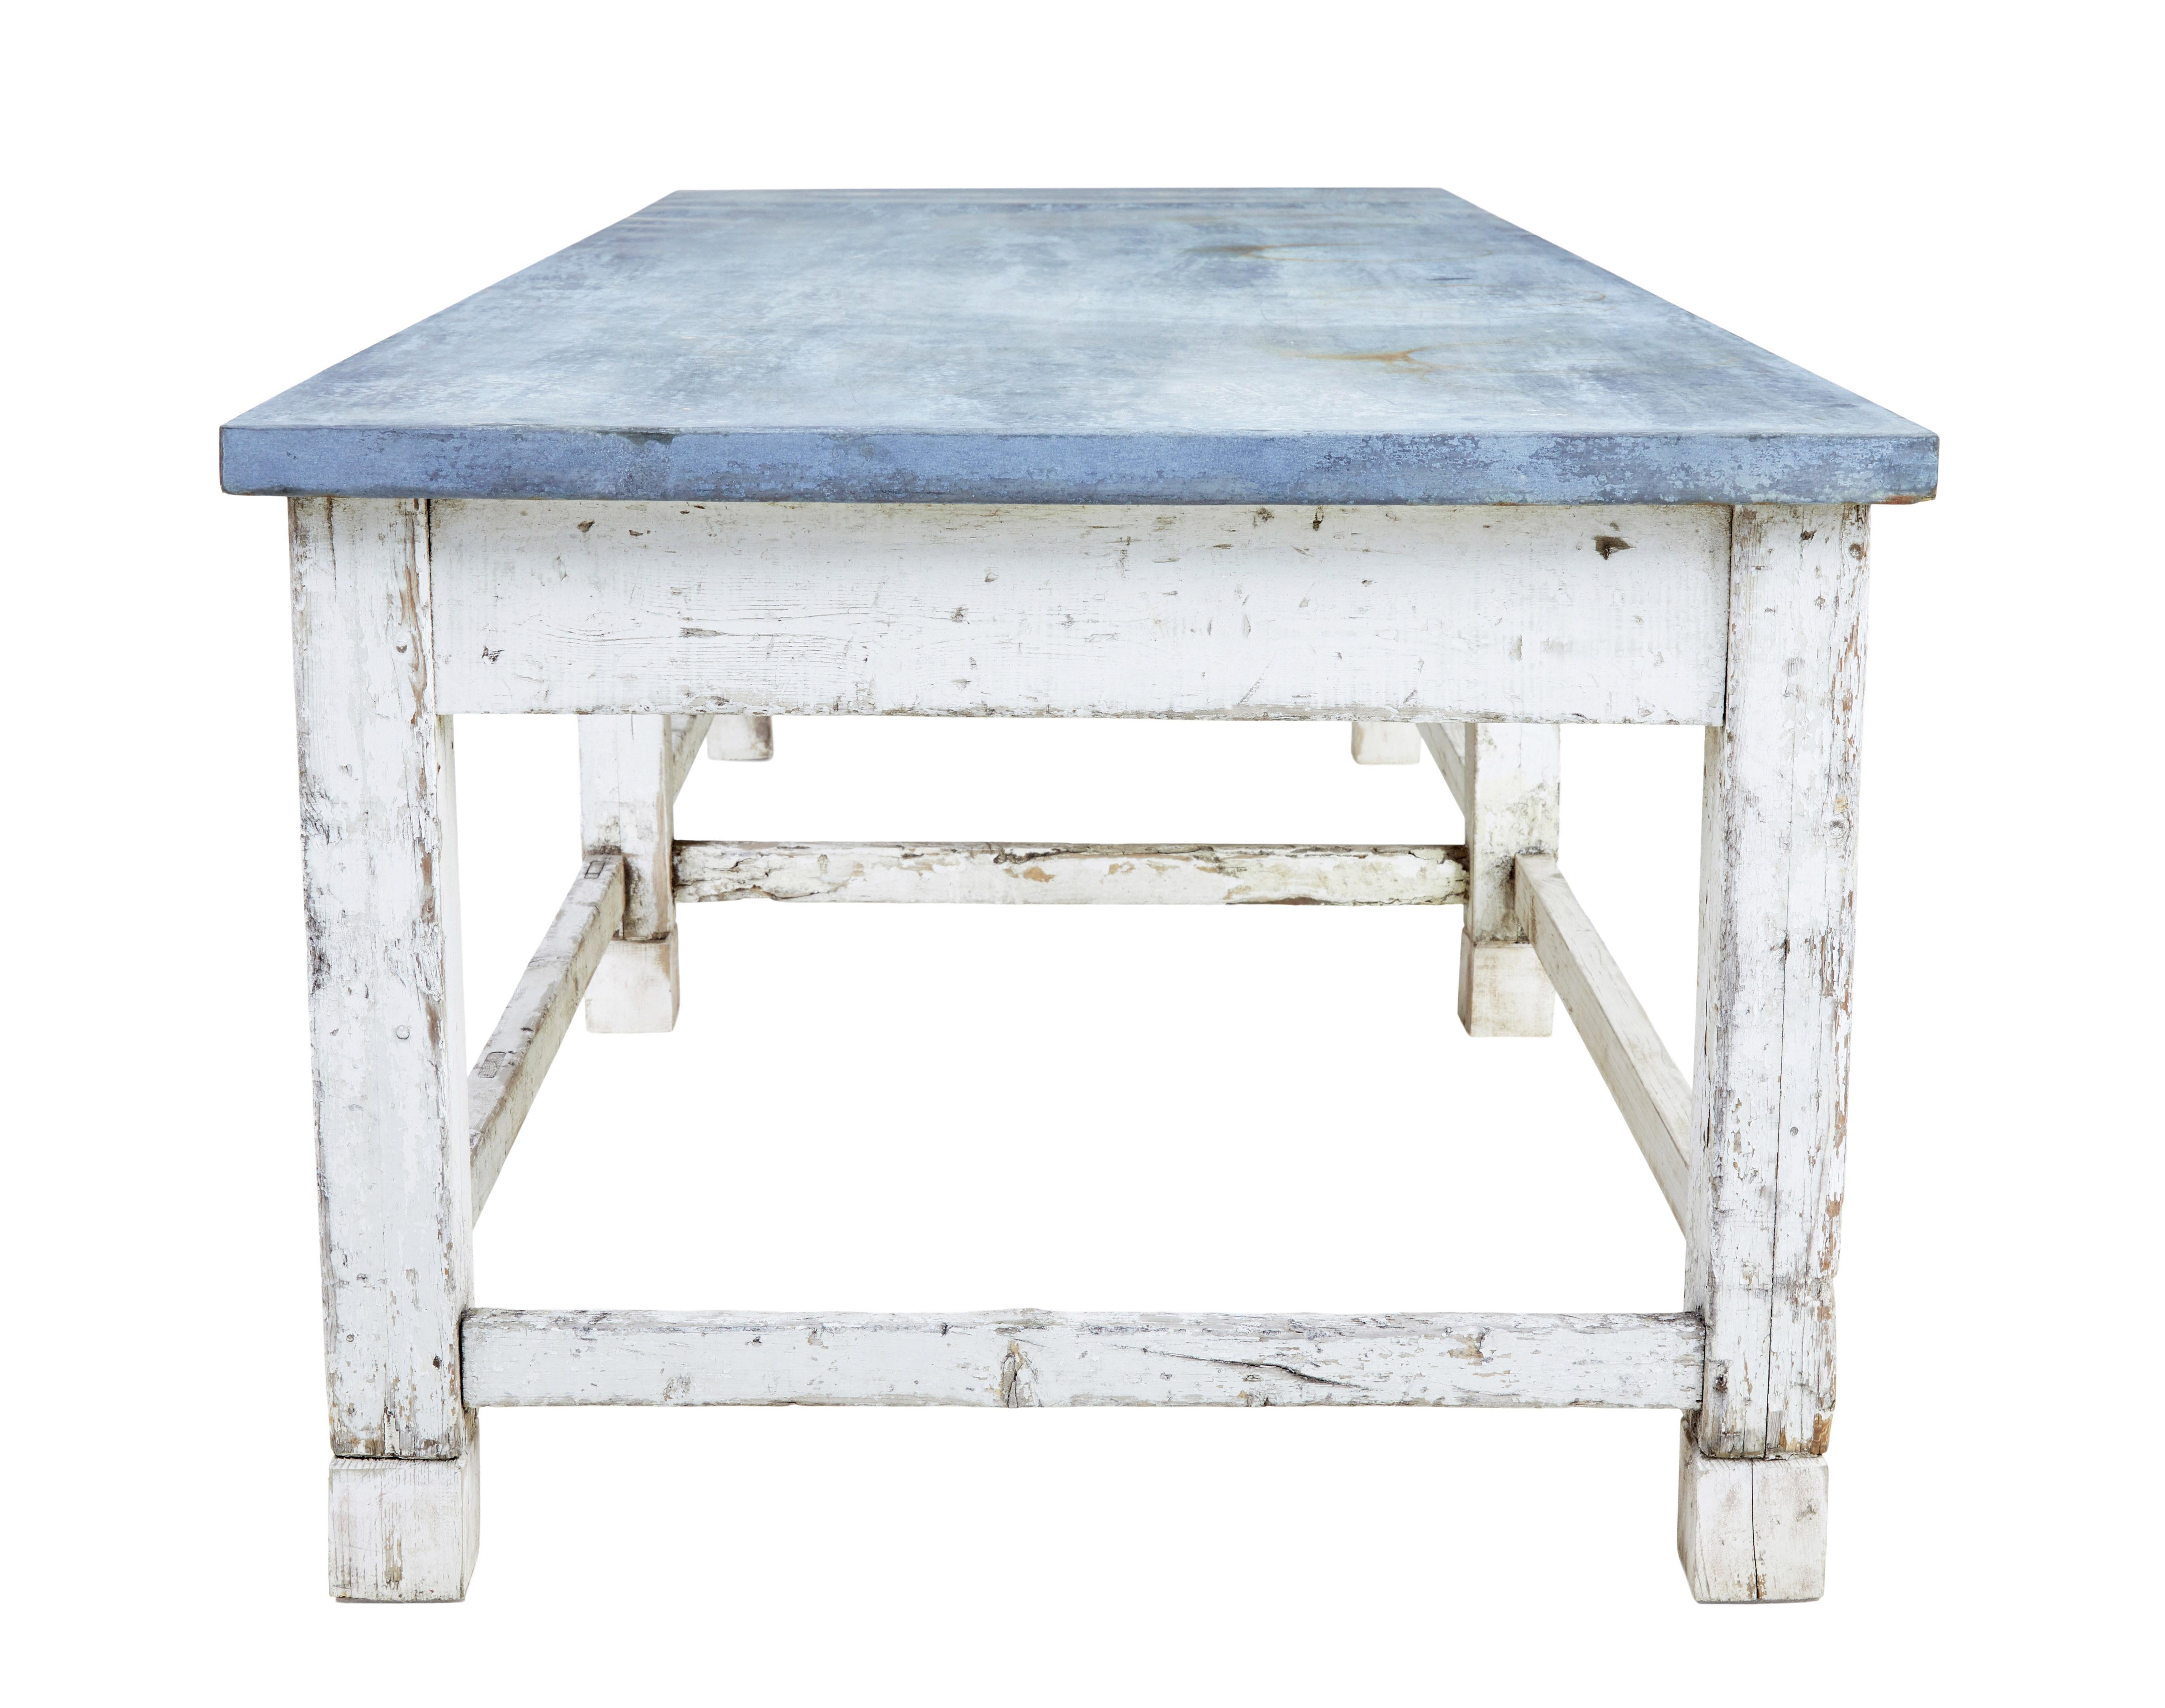 Large early 20th century pine and zinc industrial table circa 1900.

Good quality table of large proportions which offers many possibilities for further use.  Ideally lends itself for retail display or potentially as a dining table.

Original zinc